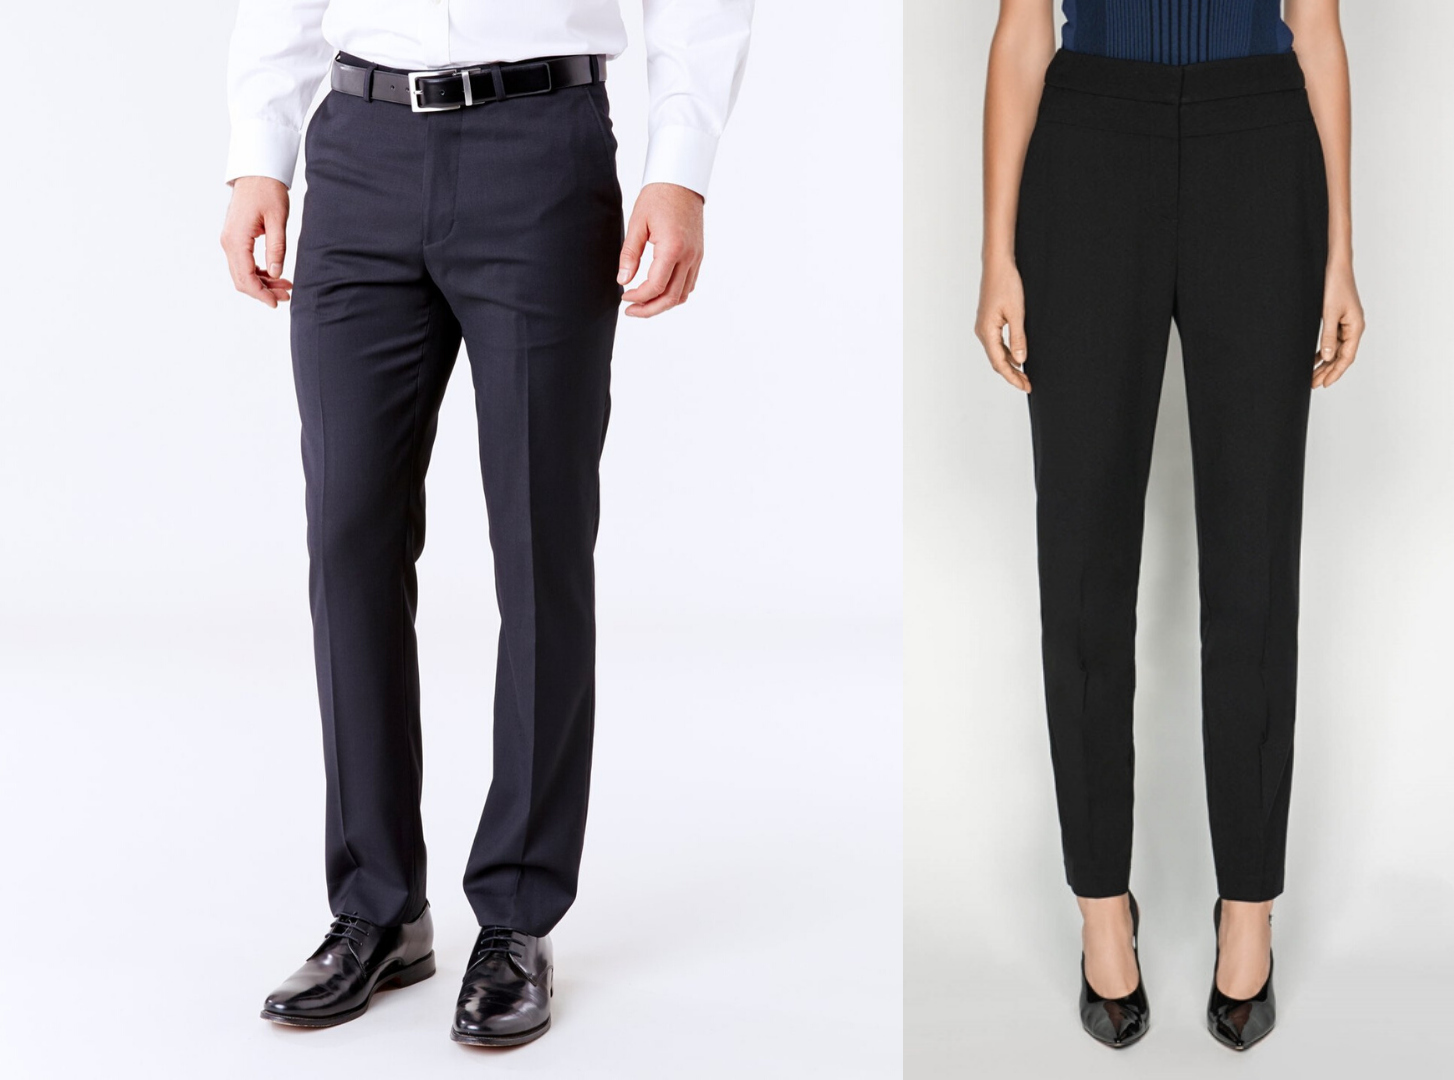 Male and female in black pants